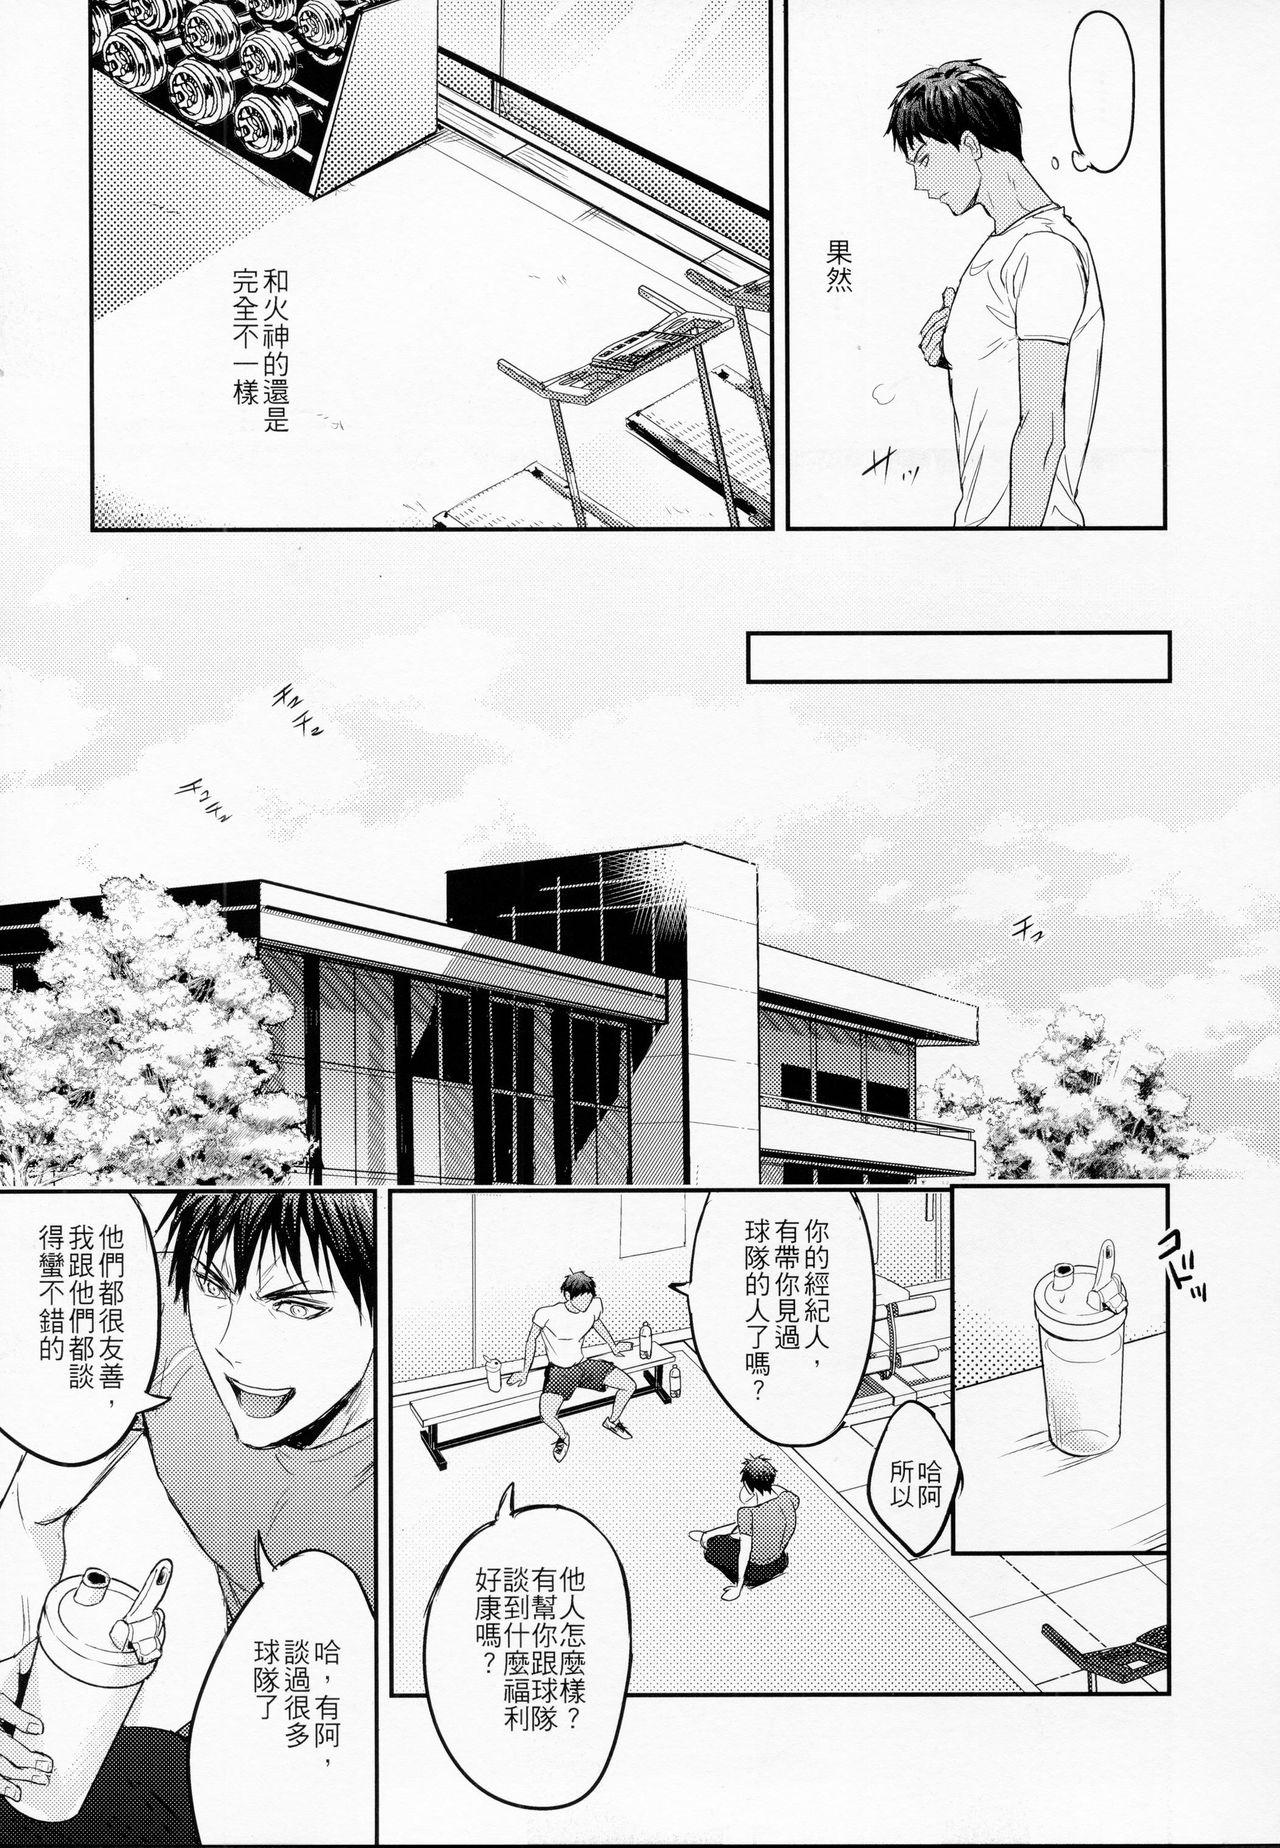 Pmv This is how we WORK IT OUT - Kuroko no basuke Blow Job - Page 6